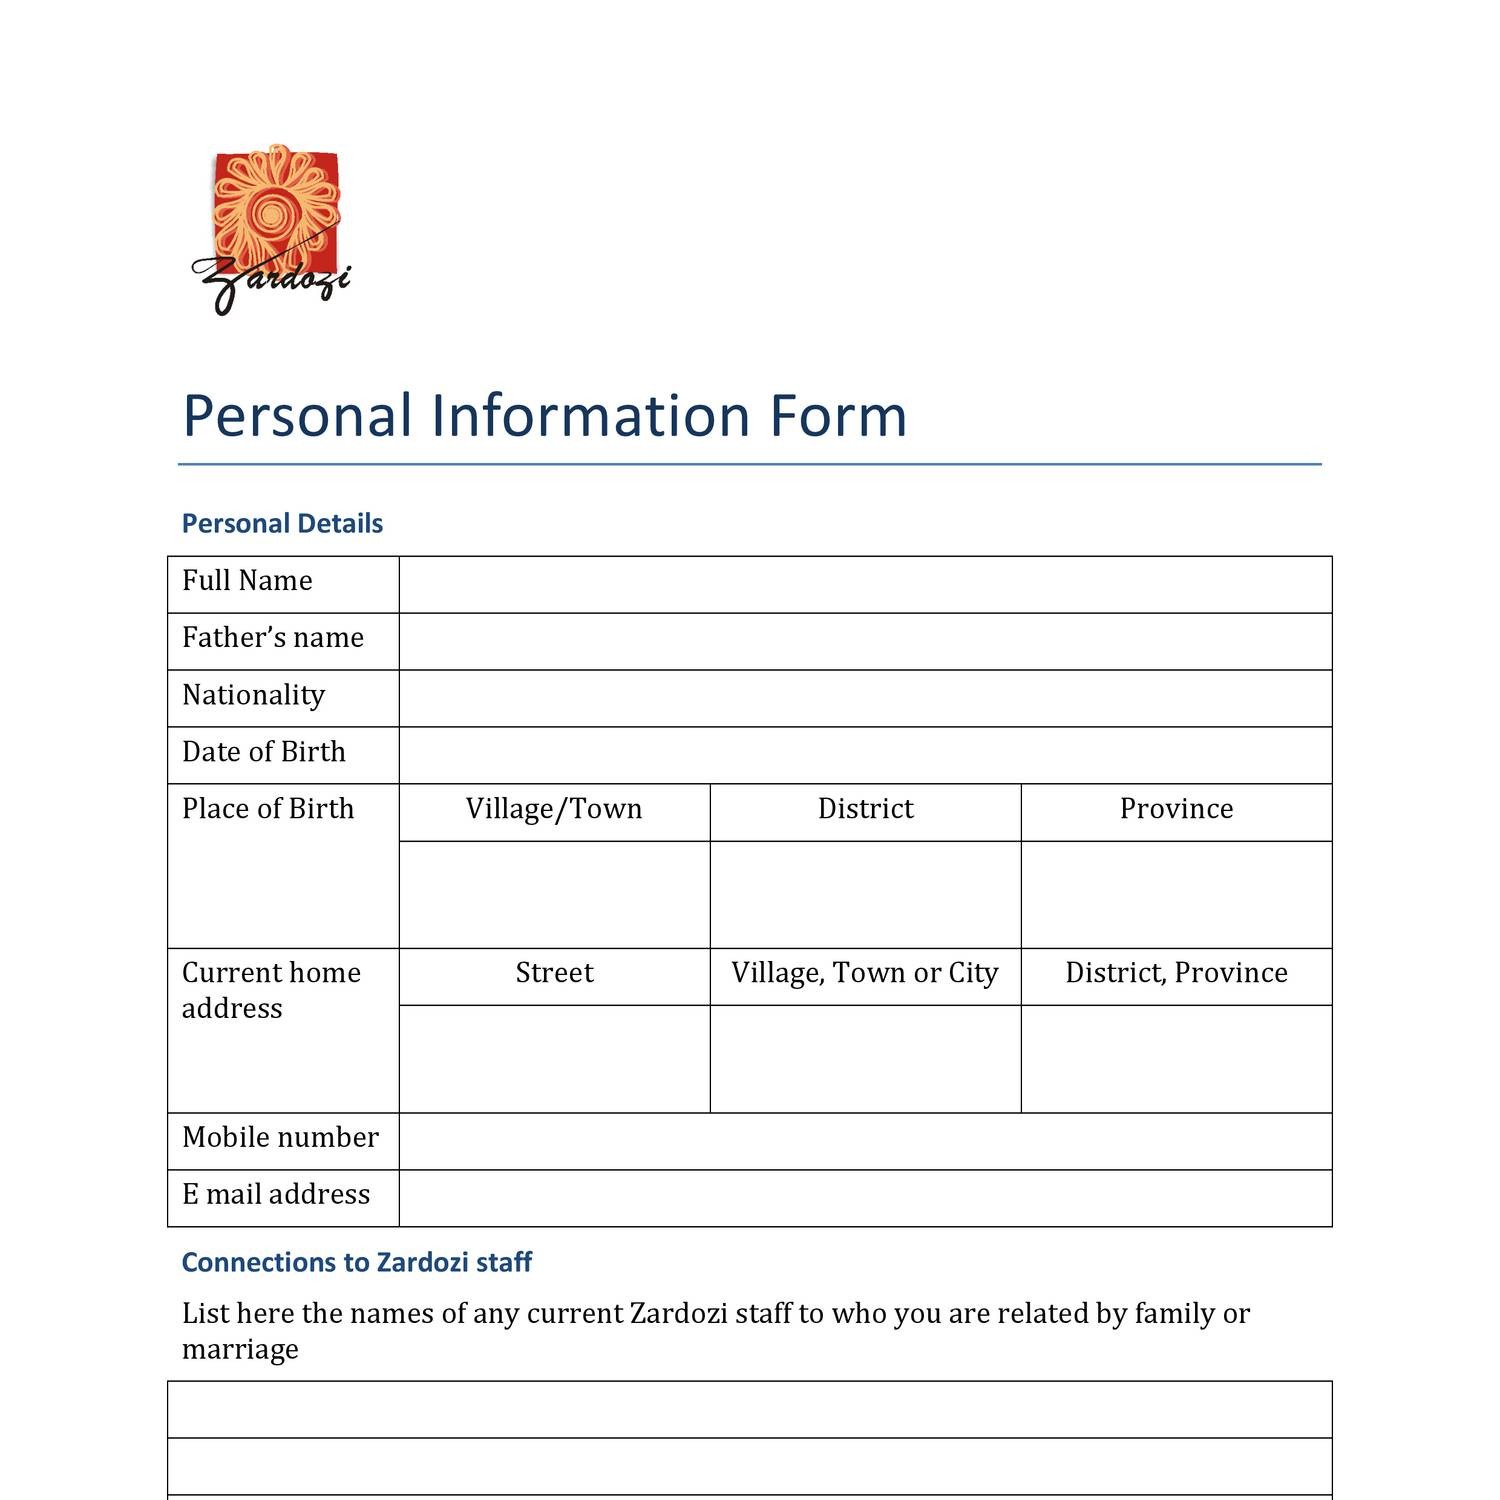 Form 4.5 Personal Information Form.pdf DocDroid